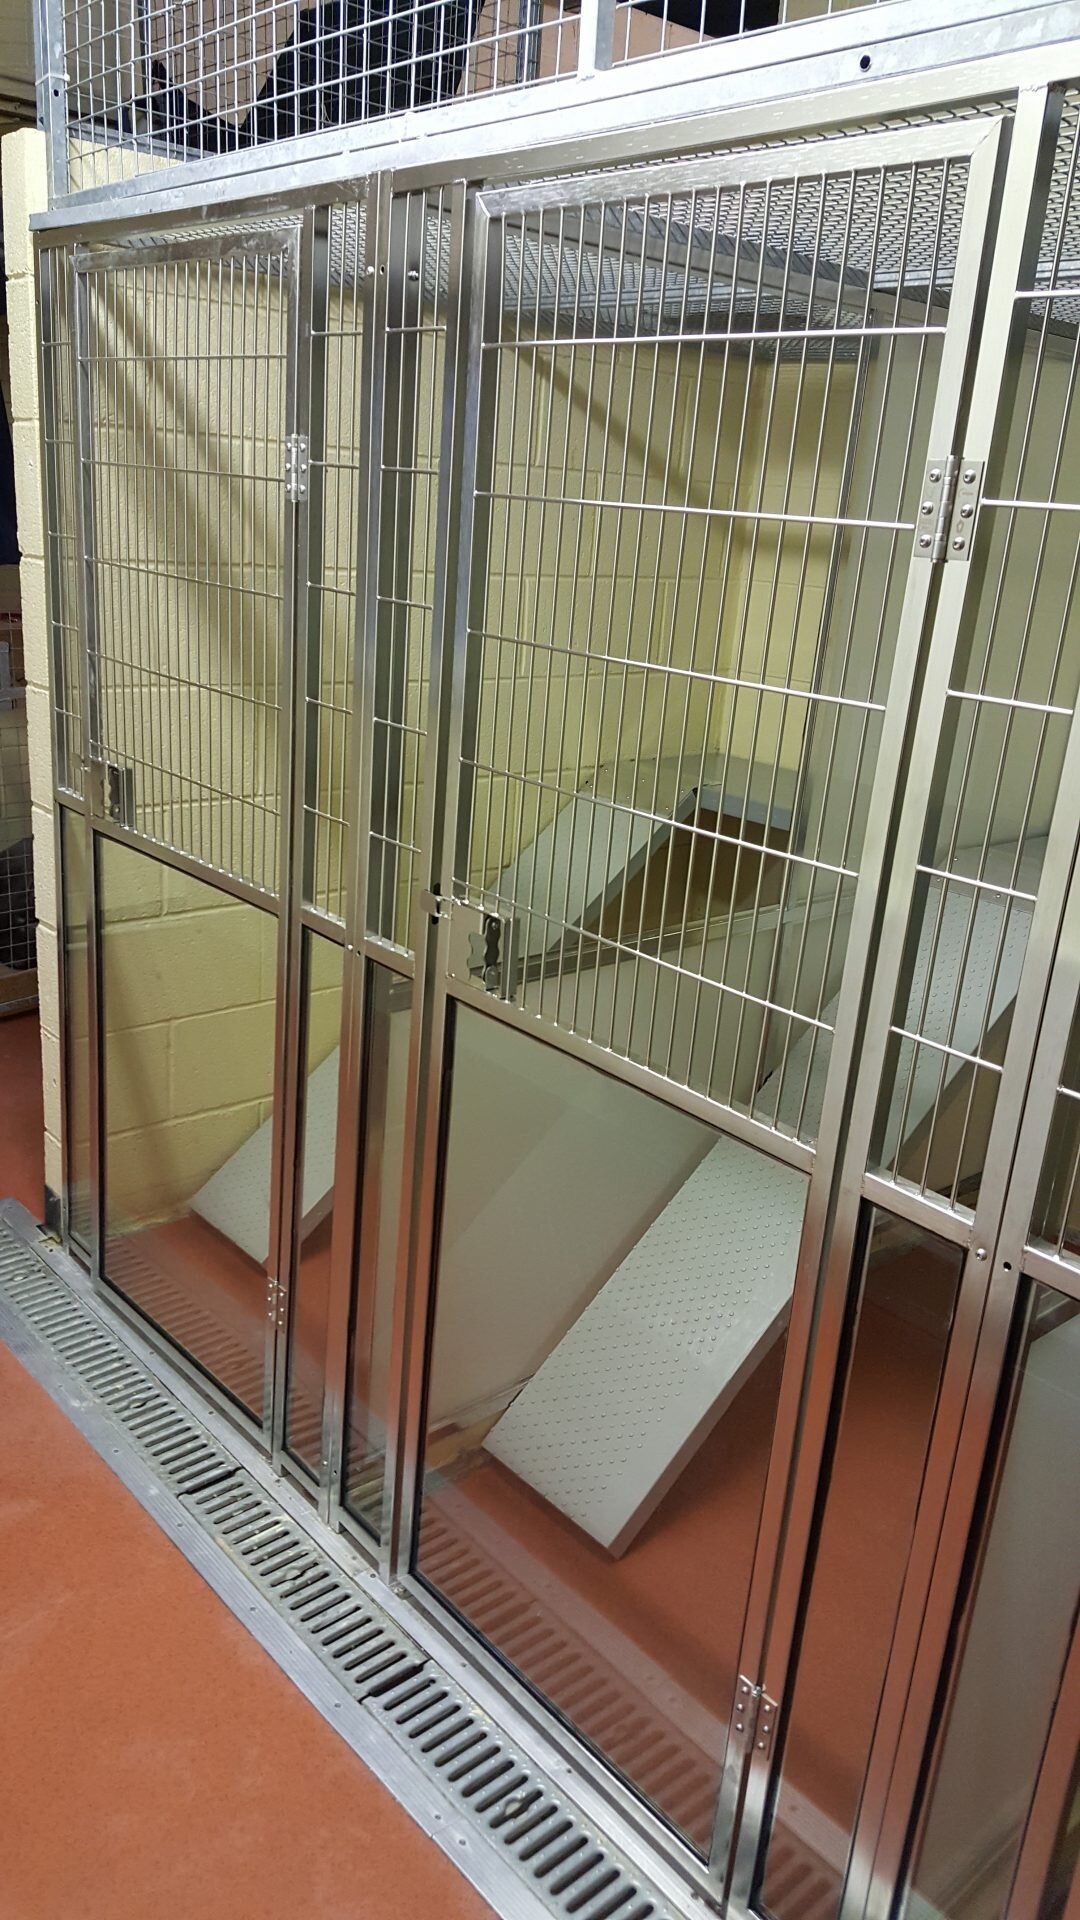 Upgraded Kennel units